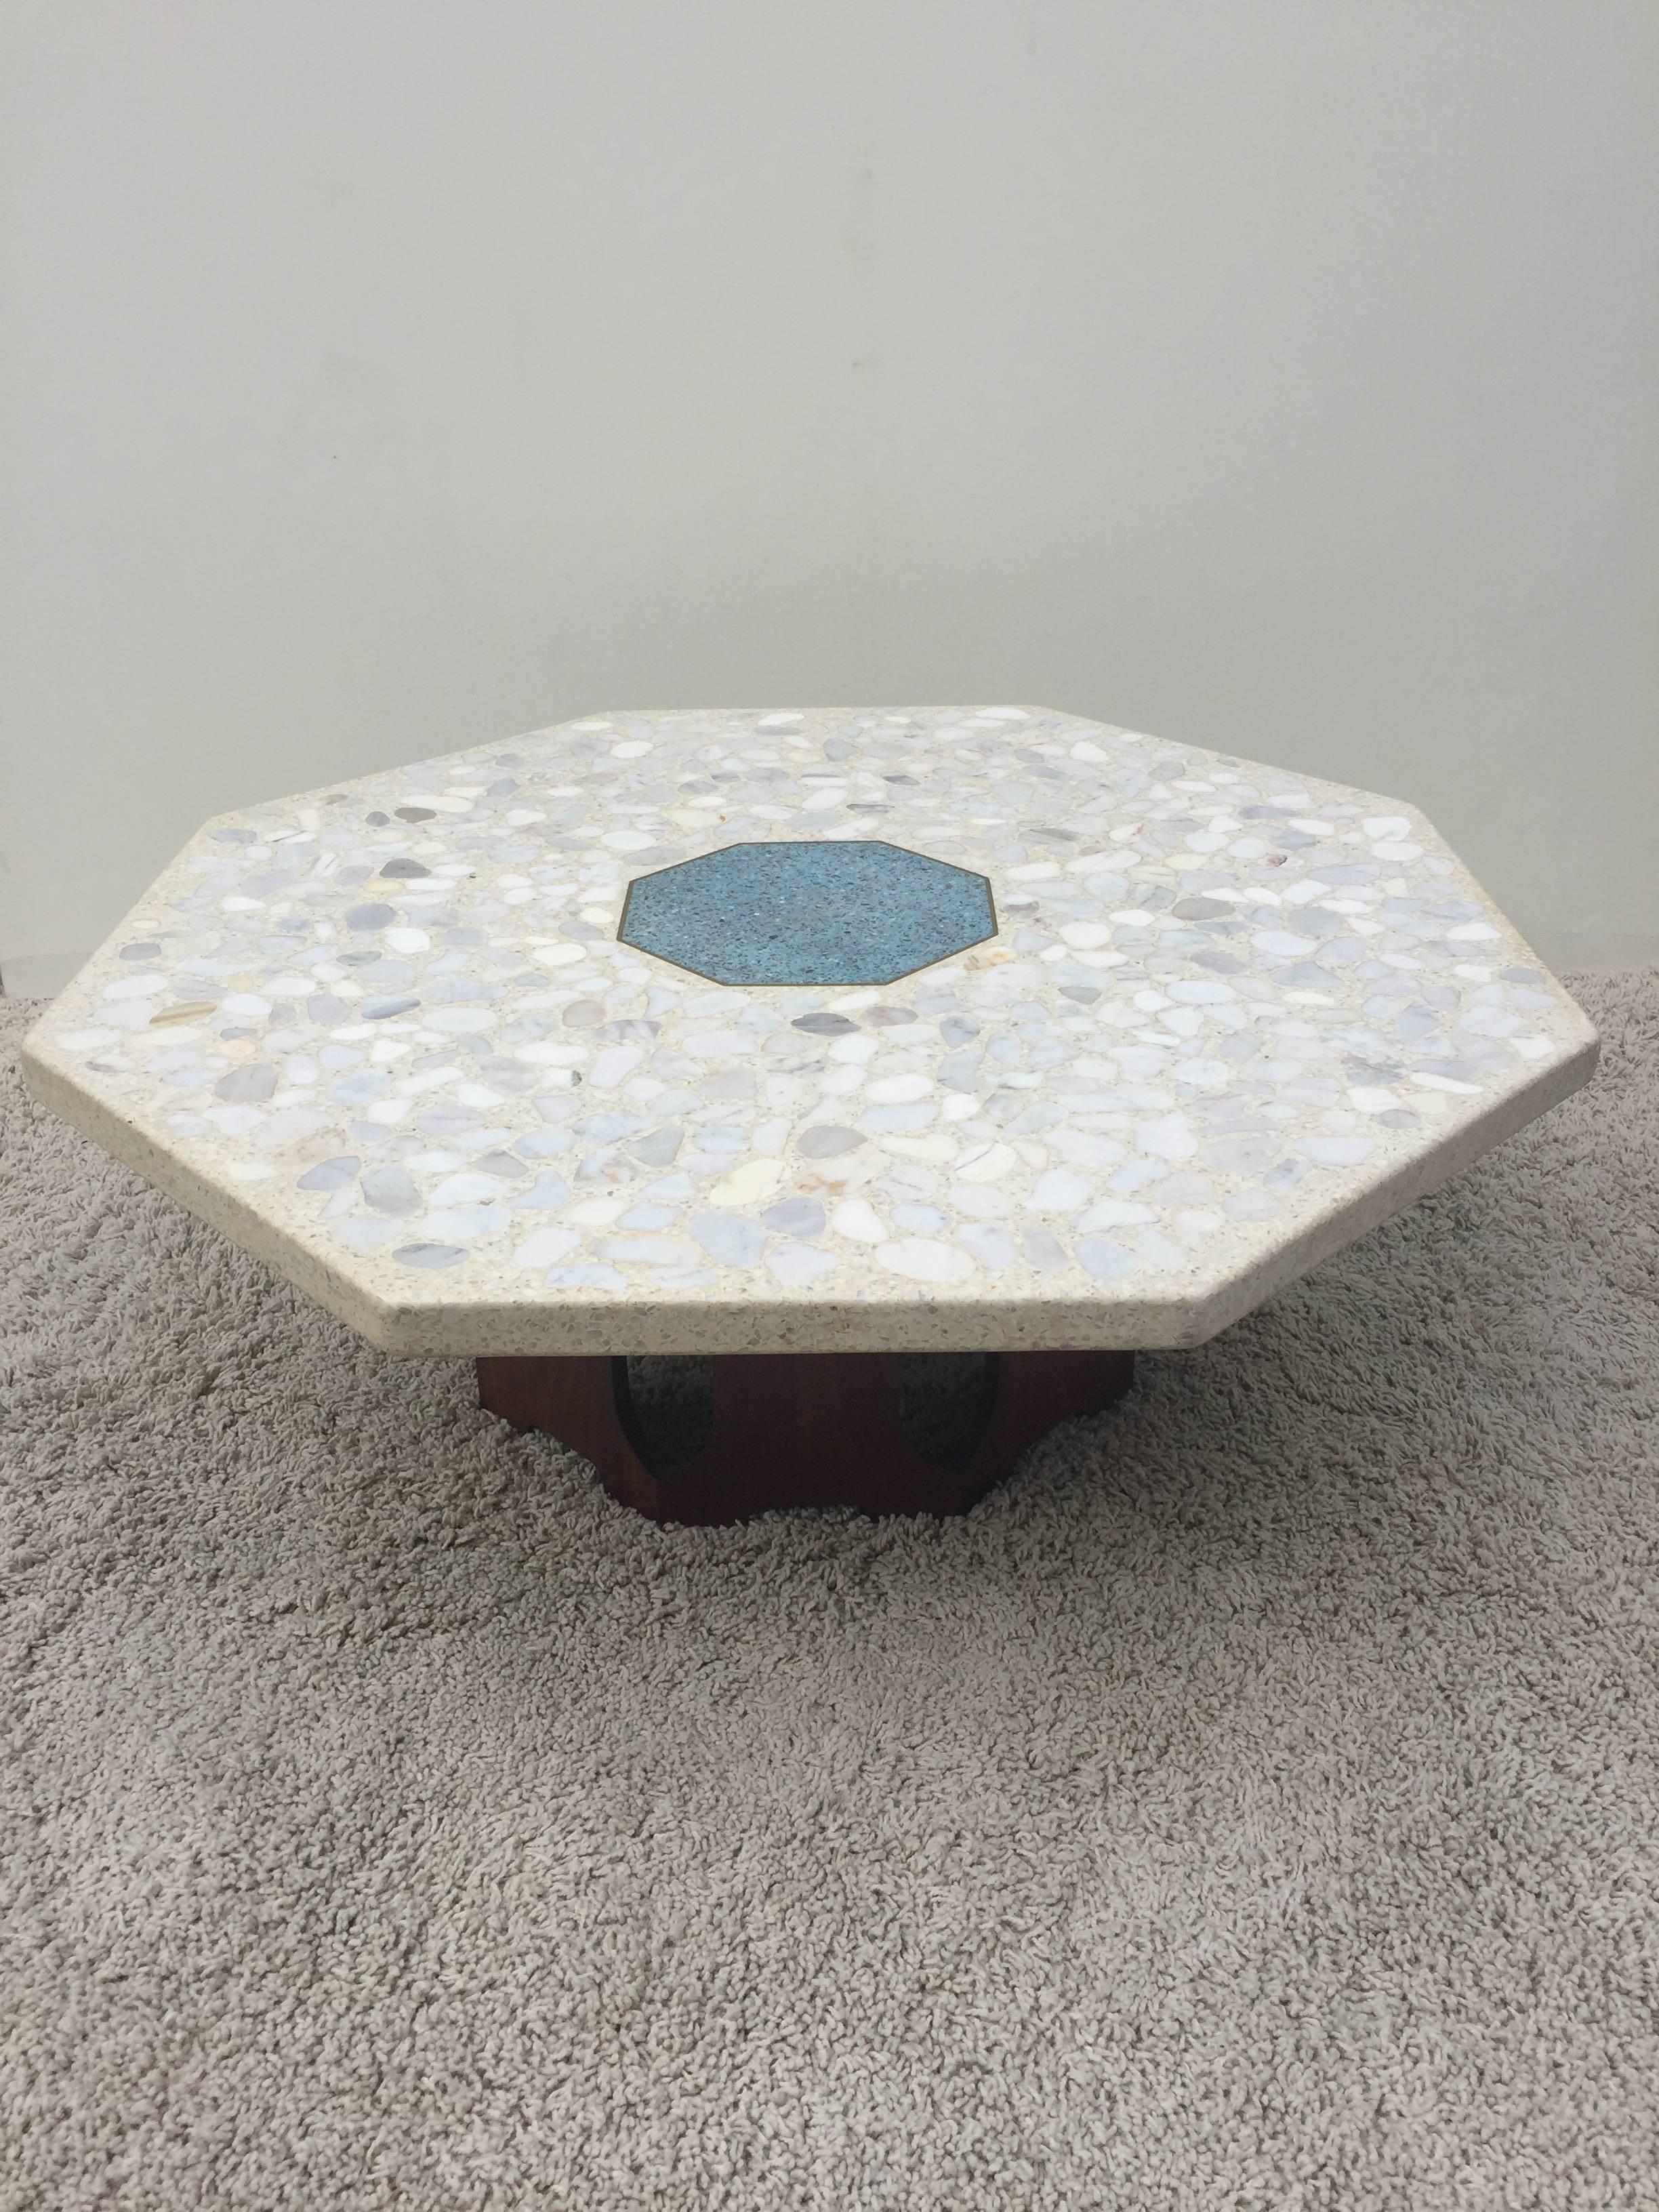 American Harvey Probber Terrazzo Inlaid Turquoise Centre Coffee Table or Cocktail Table